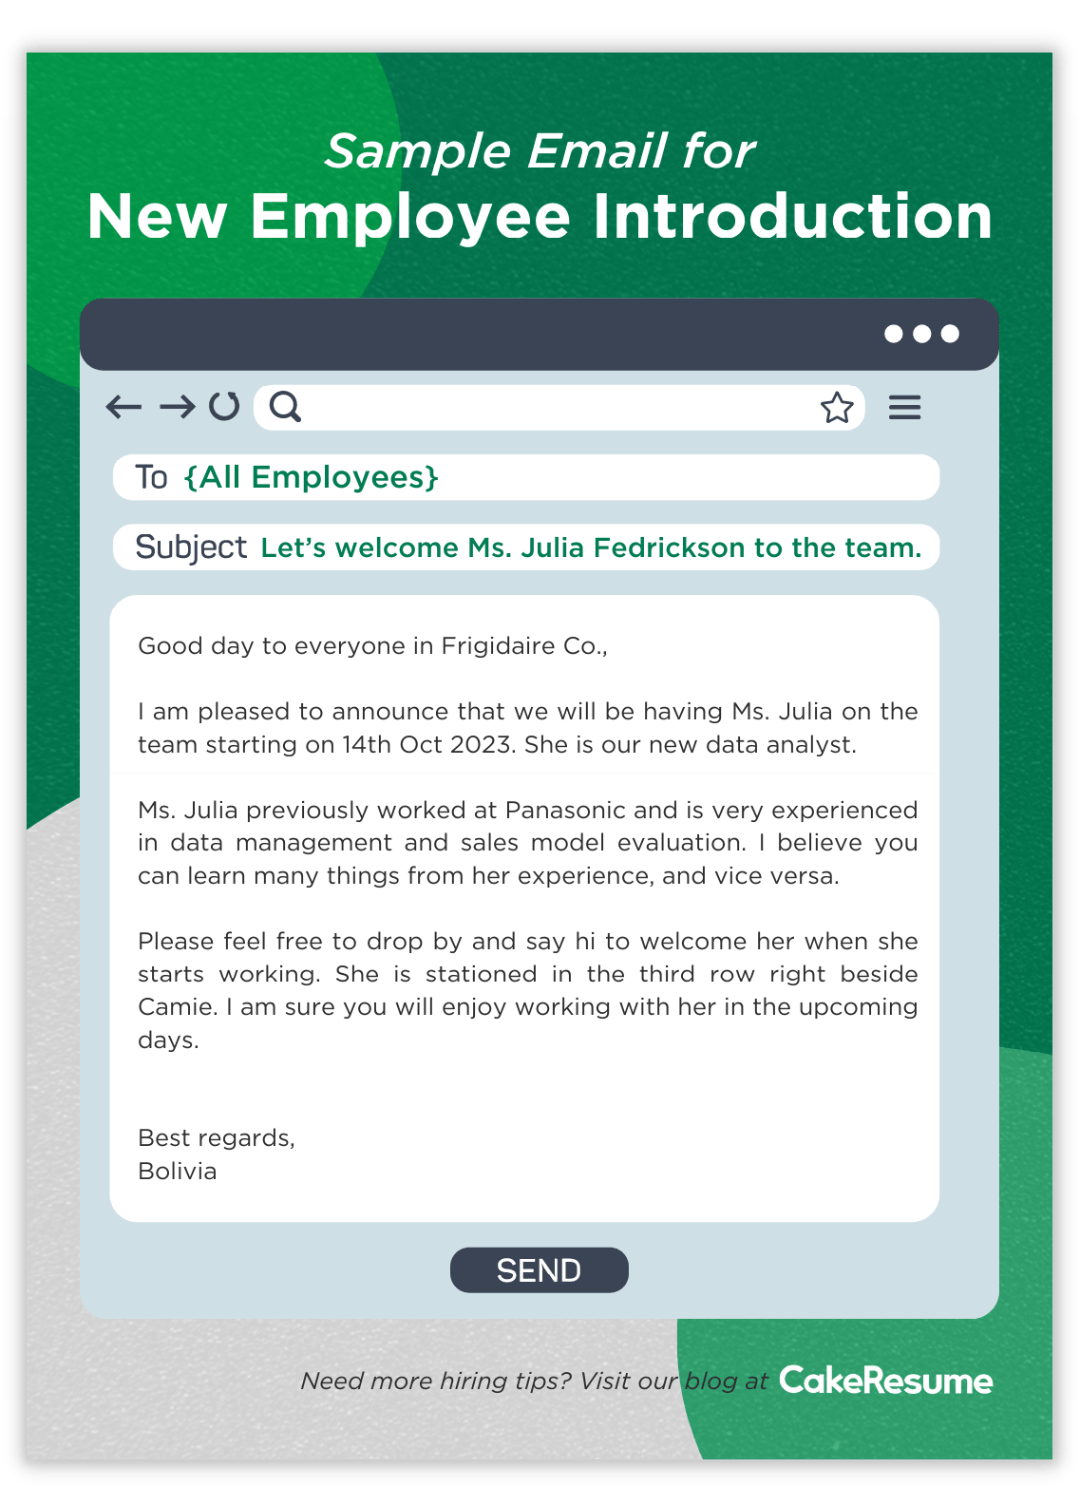 employee introduction sample email